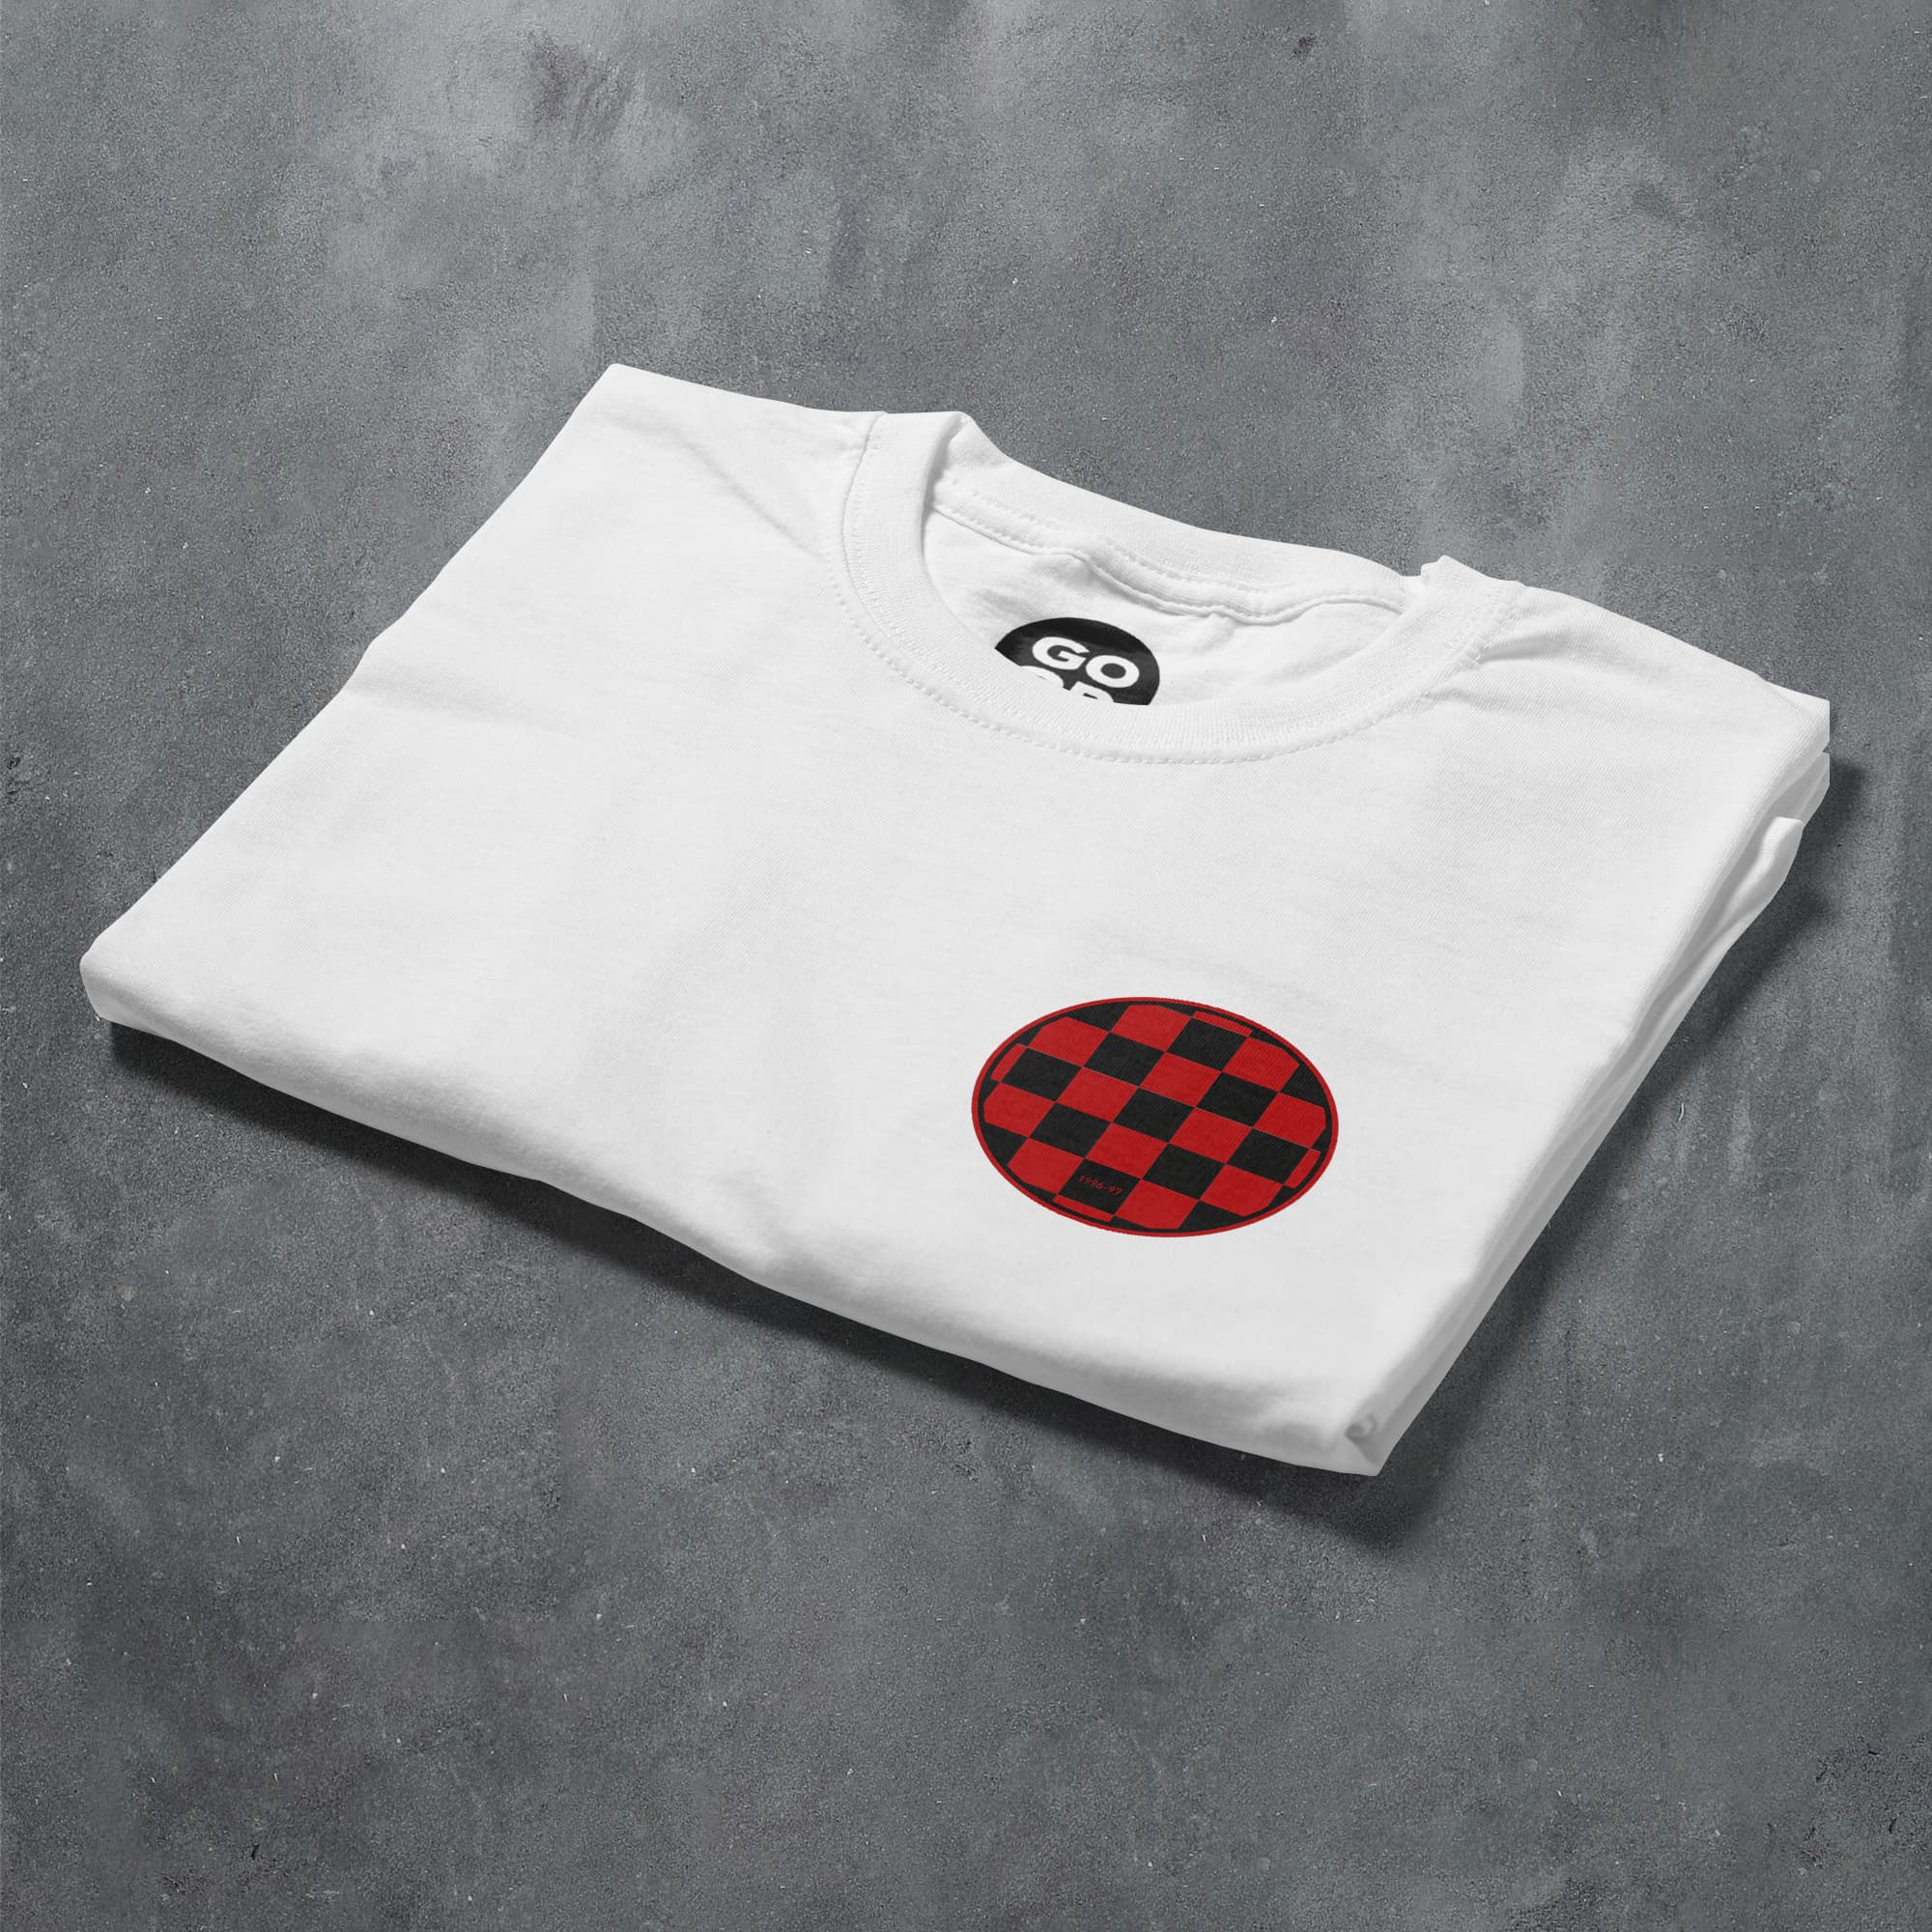 a white t - shirt with a red and black checkered design